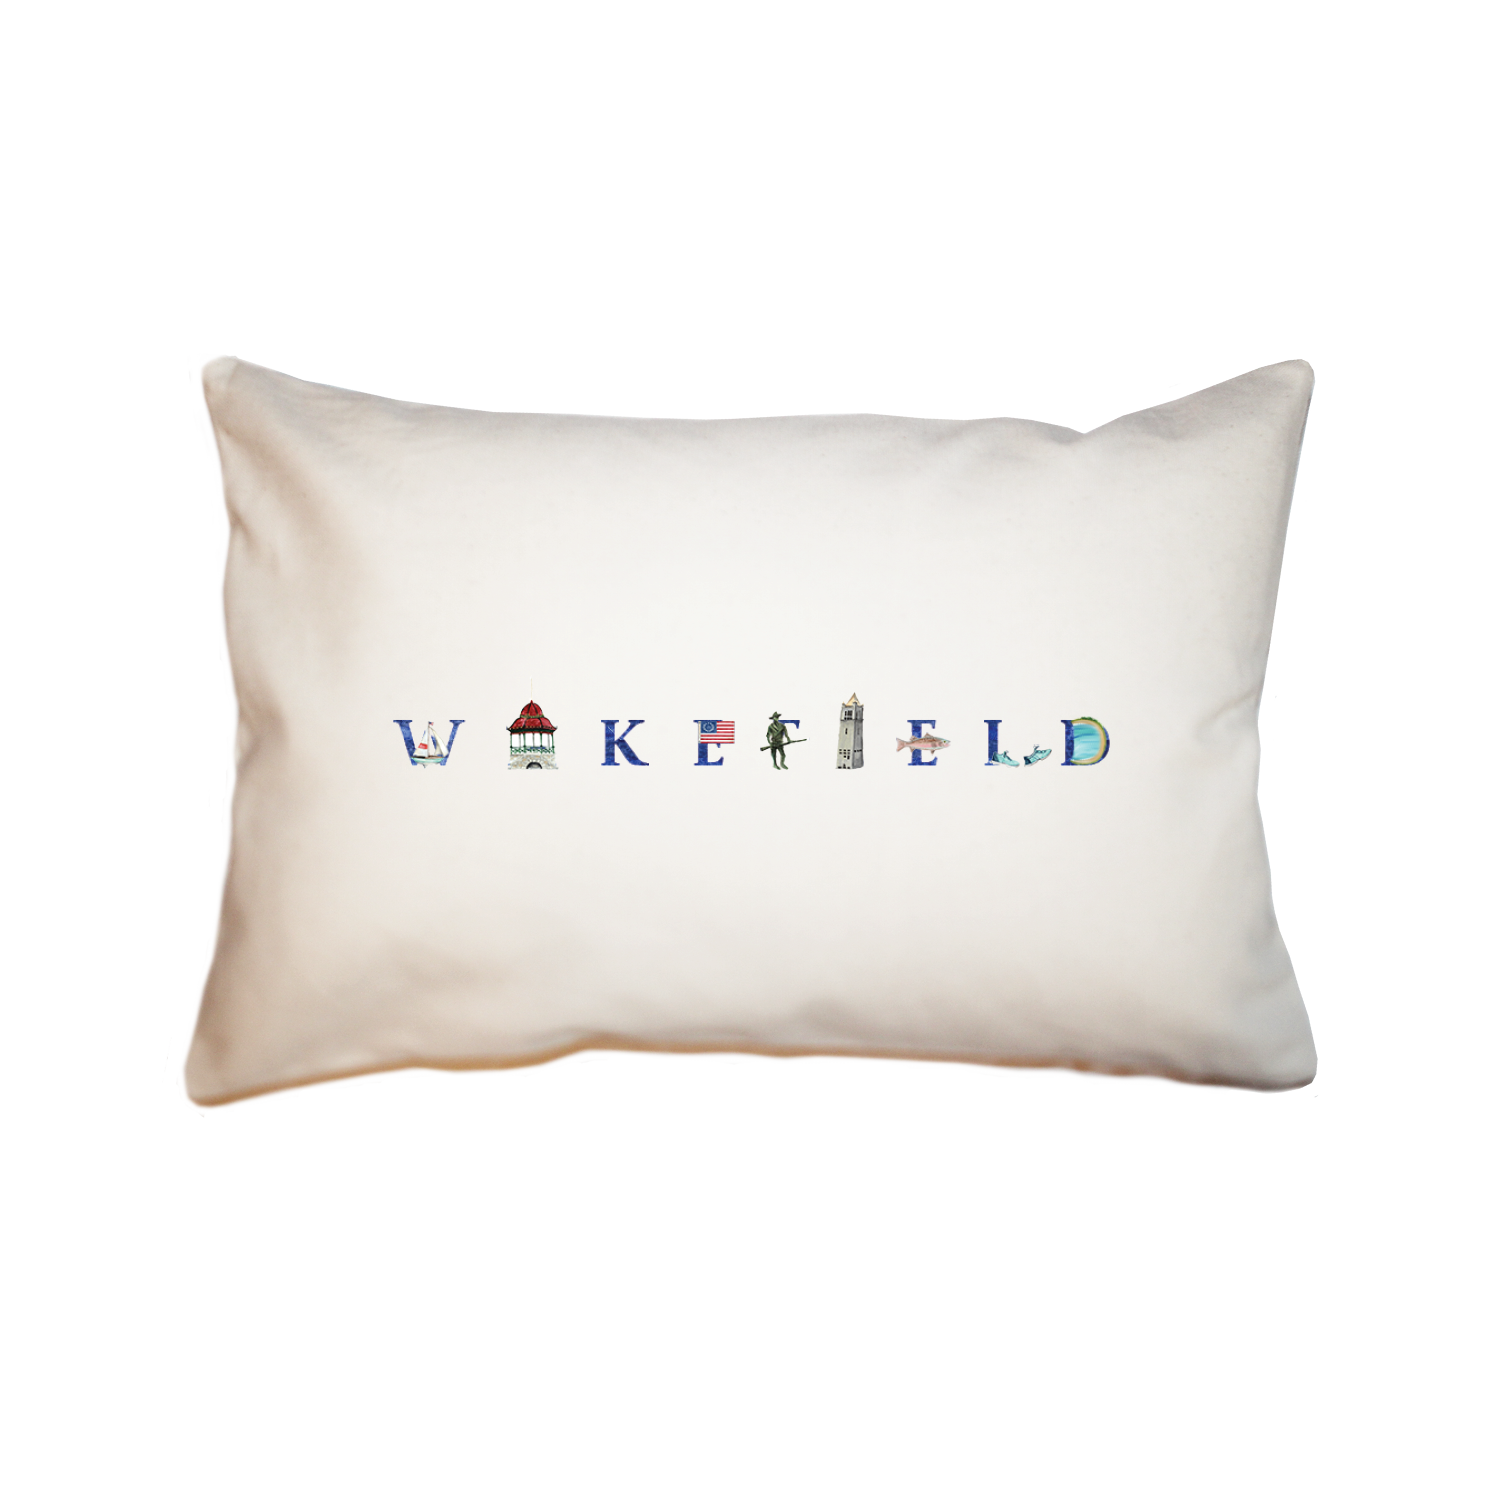 Wakefield large rectangle pillow